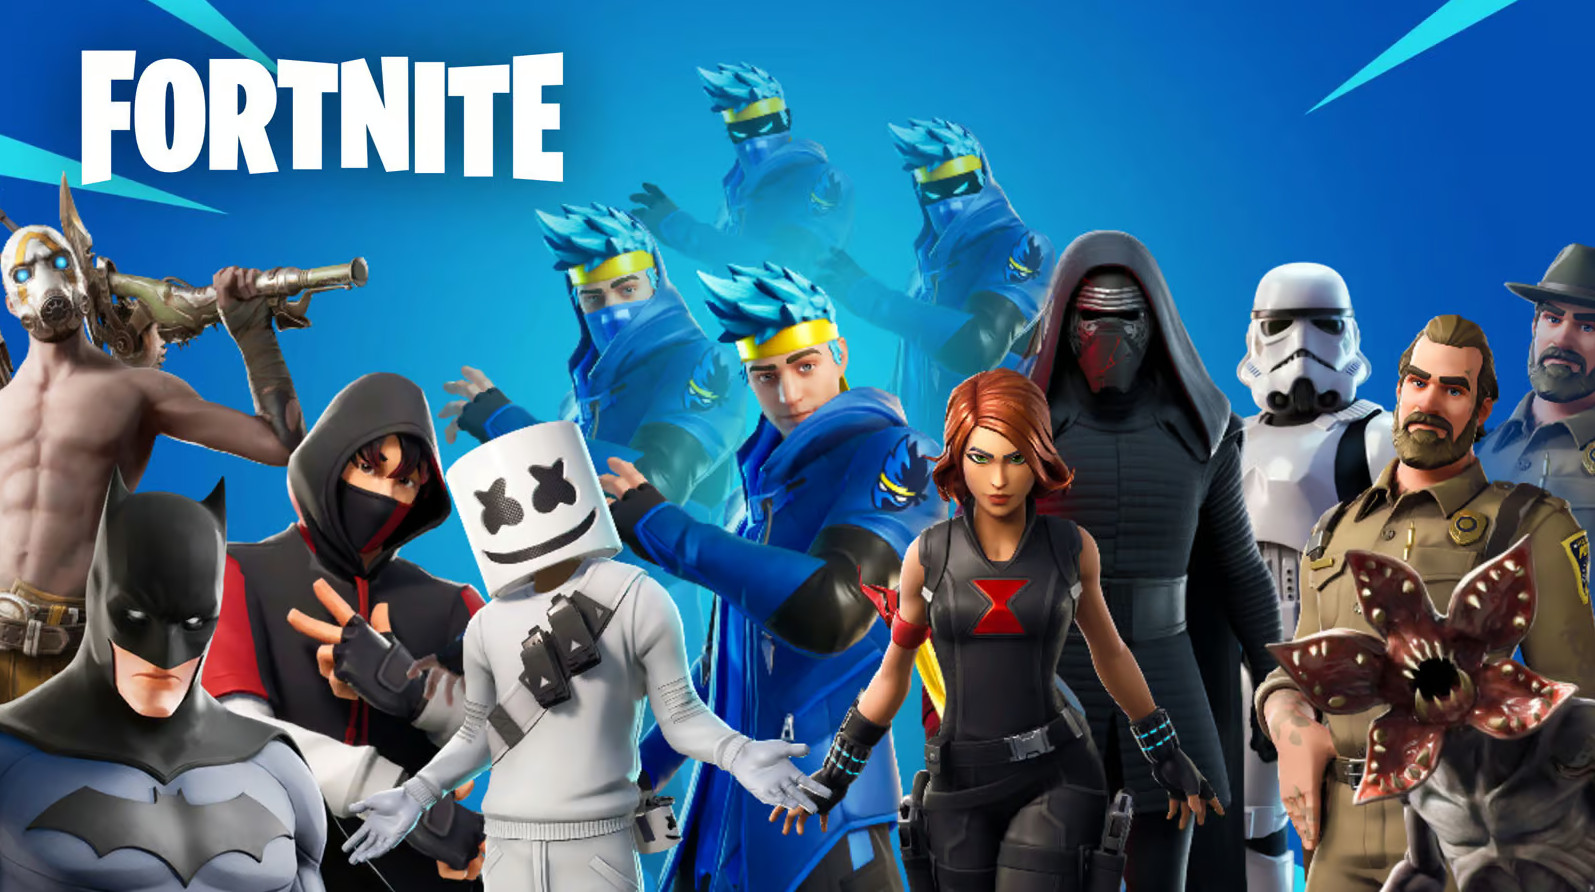 Fortnite's first big collaboration of the year could make a big statement